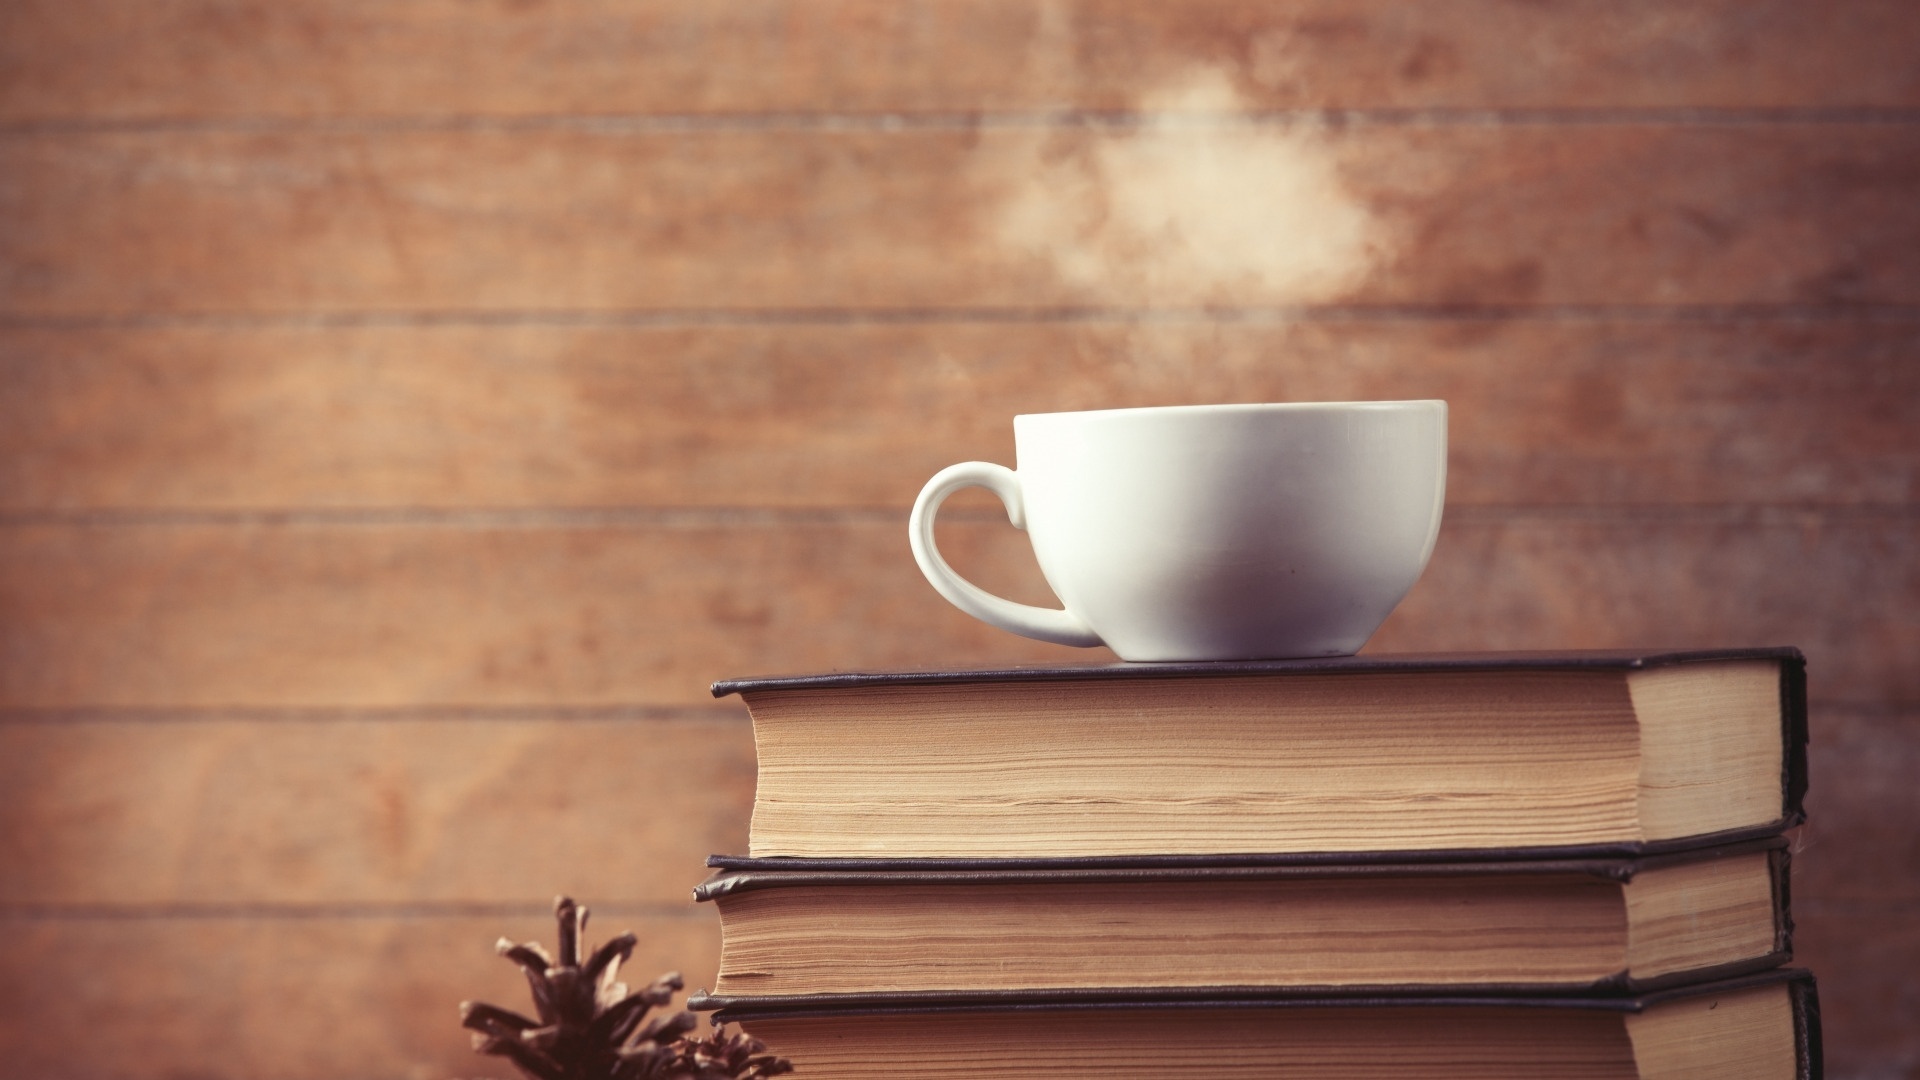 Coffee and books, Cozy mornings, Warm beverages, Reading rituals, 1920x1080 Full HD Desktop